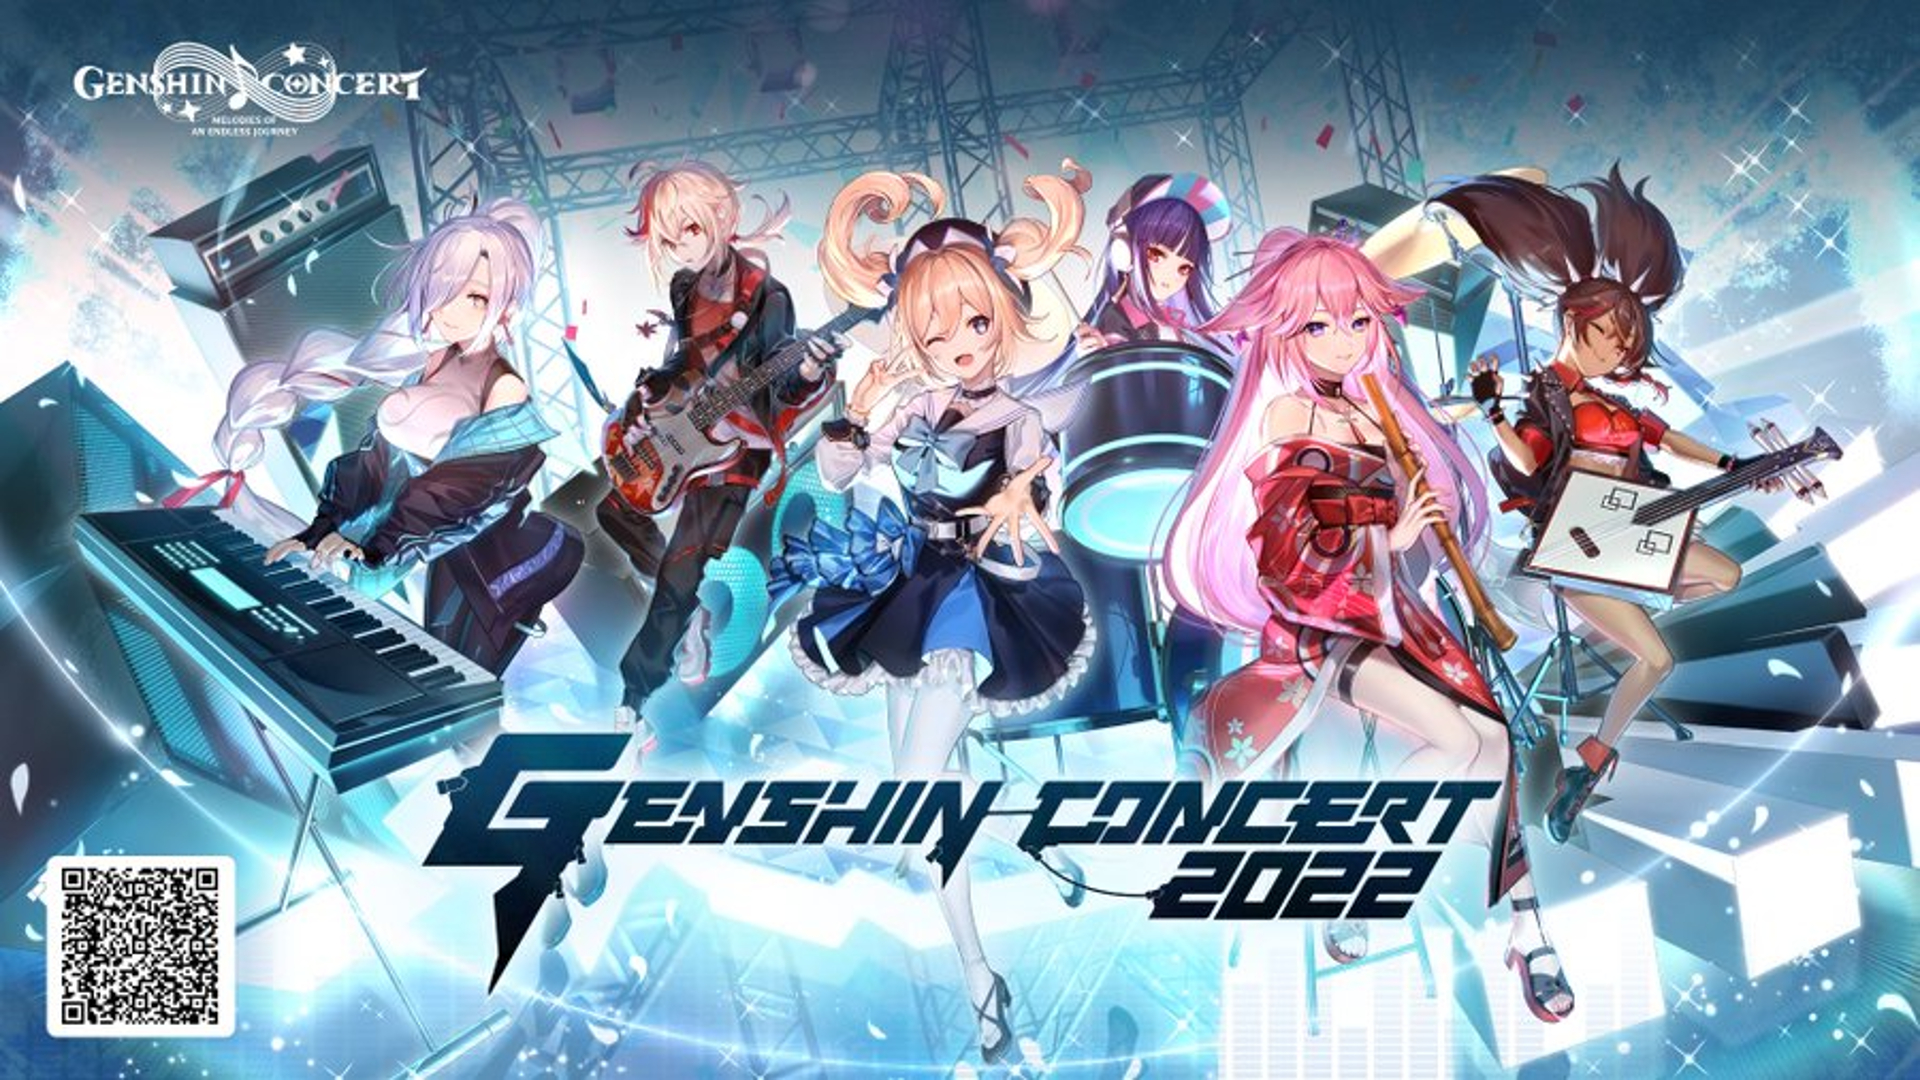 Watch The Genshin Impact Concert 2022 “Melodies Of An Endless Journey